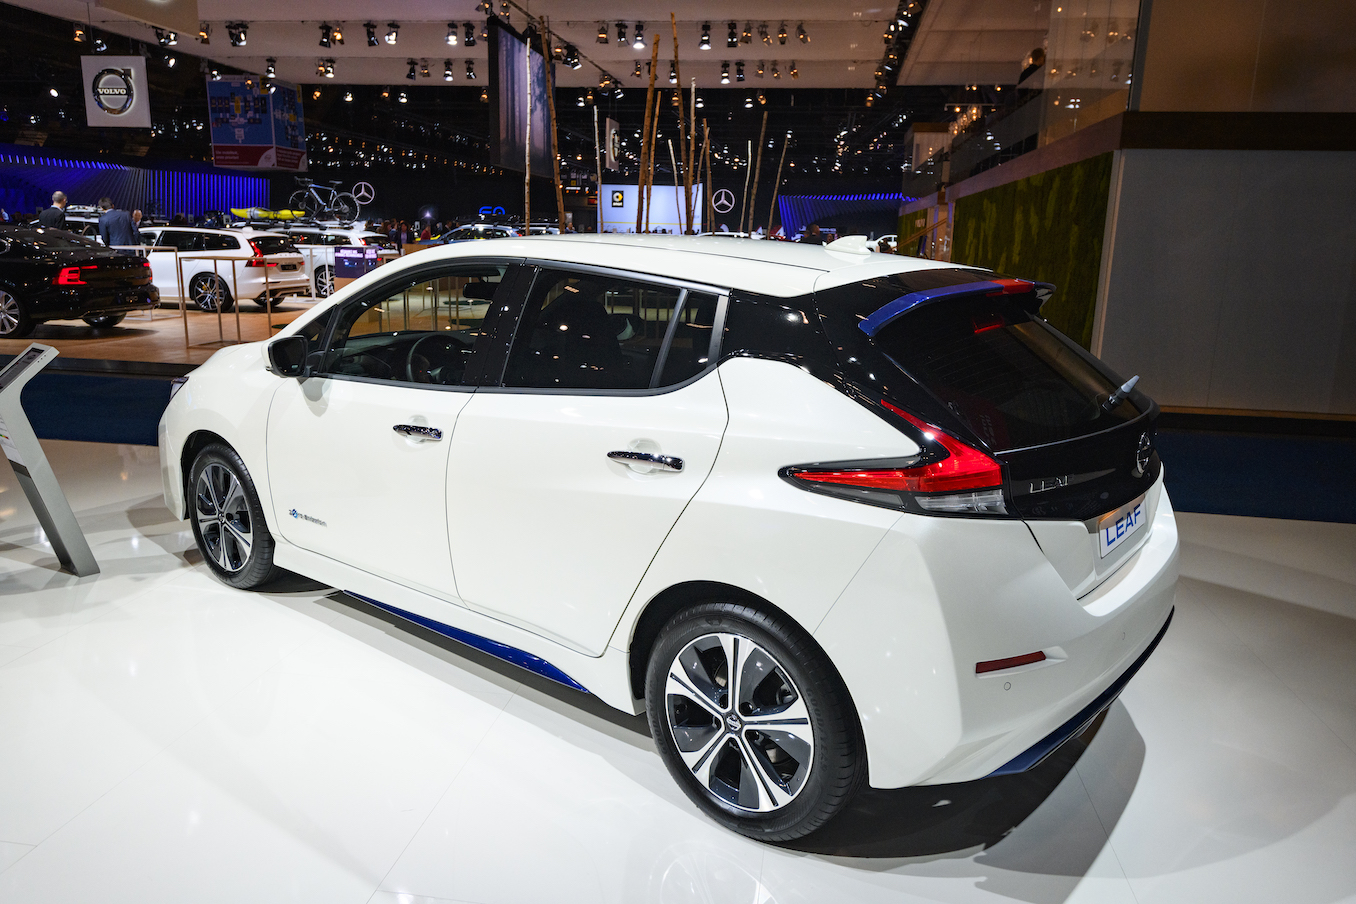 Nissan Leaf compact five-door hatchback battery electric vehicle on display at Brussels Expo